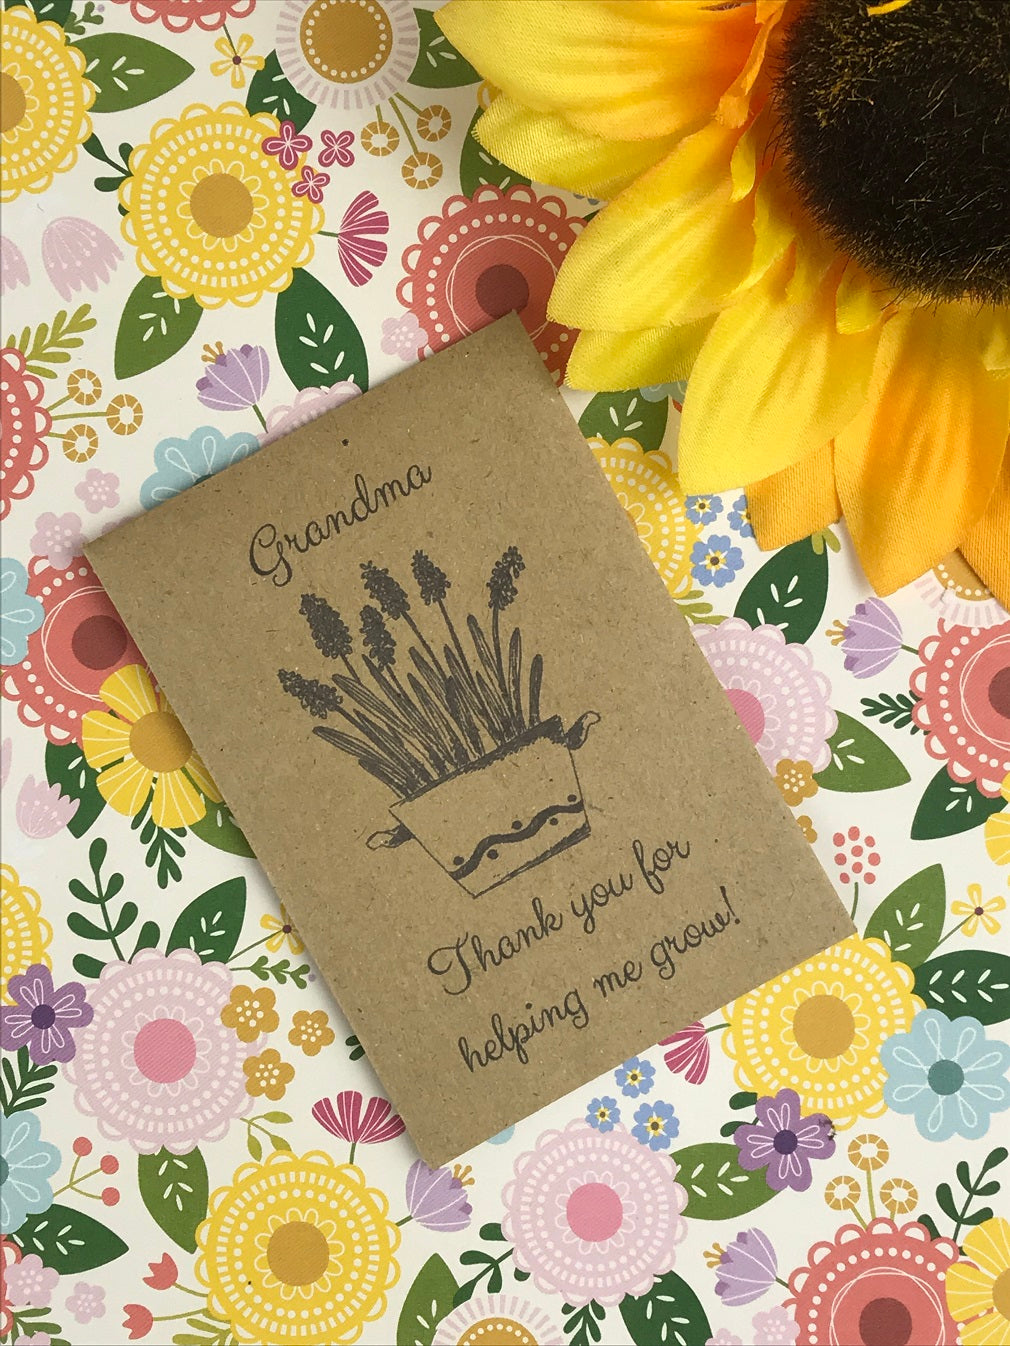 Grandma Thank You For Helping Me Grow! - Mini Kraft Envelope with Wildflower Seeds-The Persnickety Co